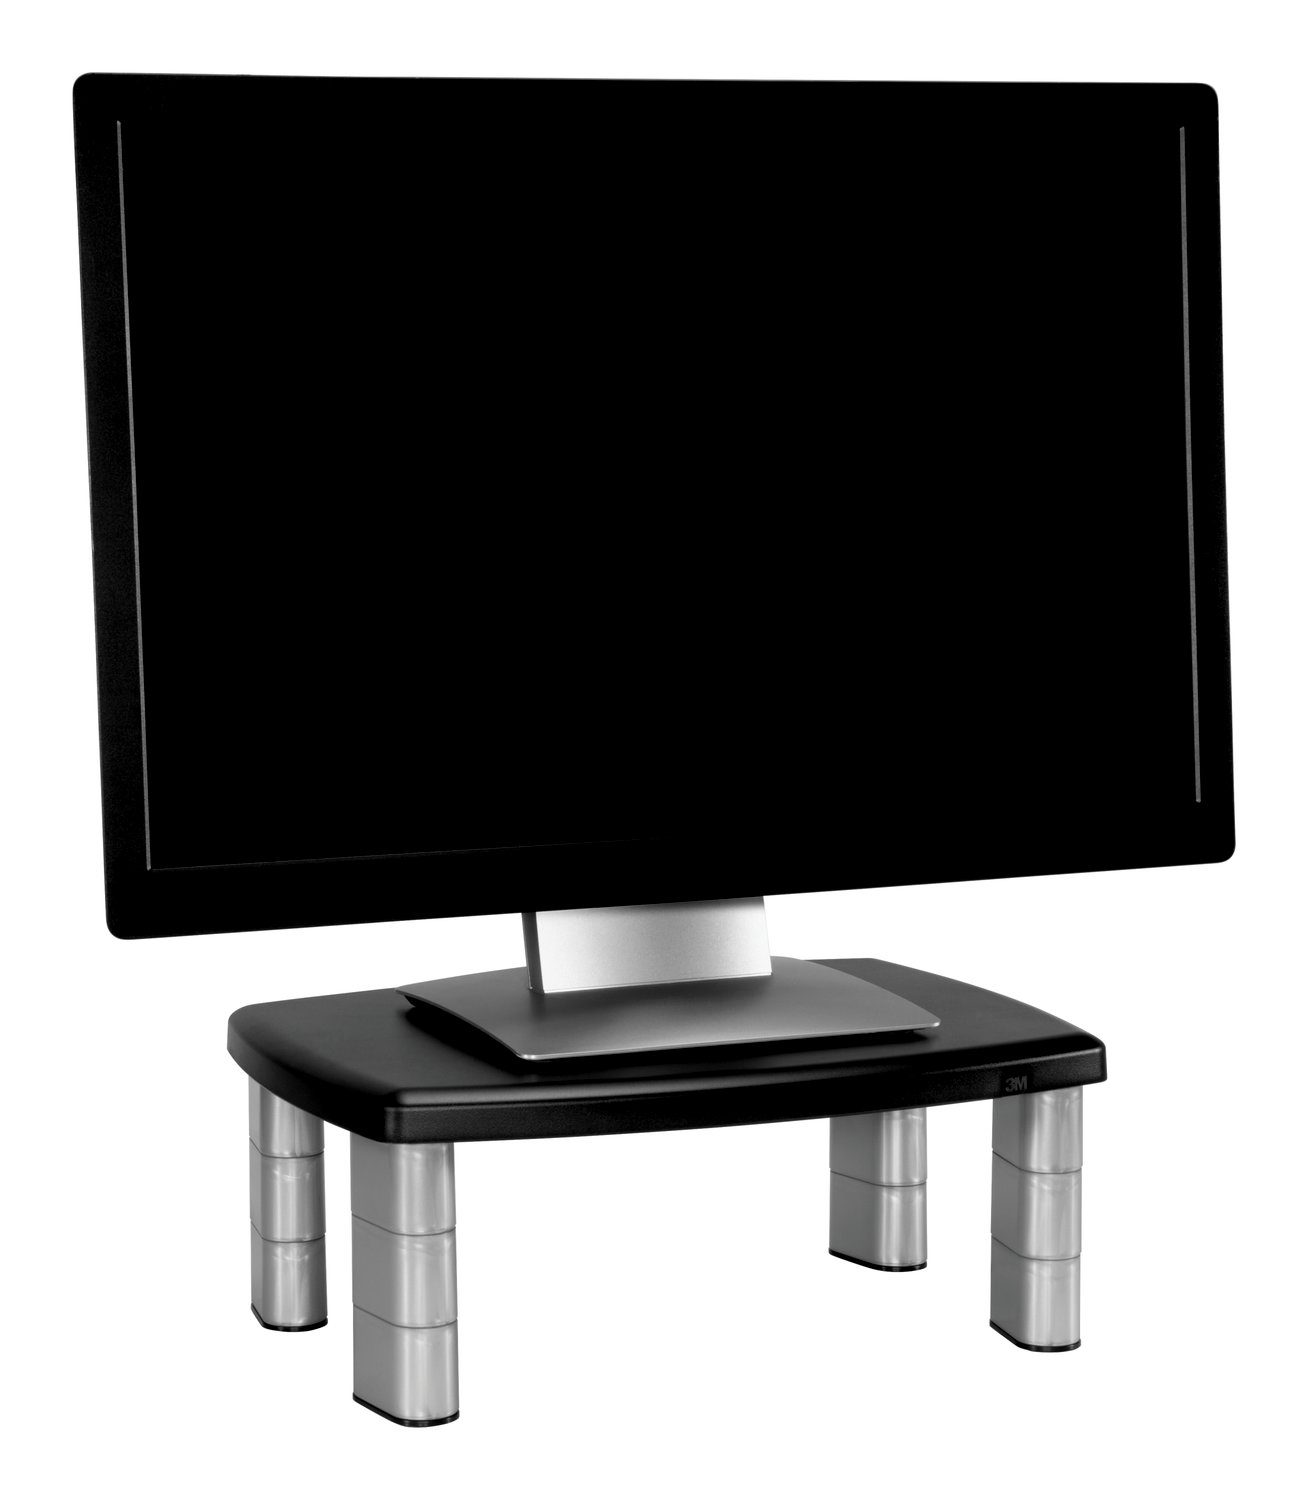 7100043255 - 3M Adjustable Monitor Stand MS80B